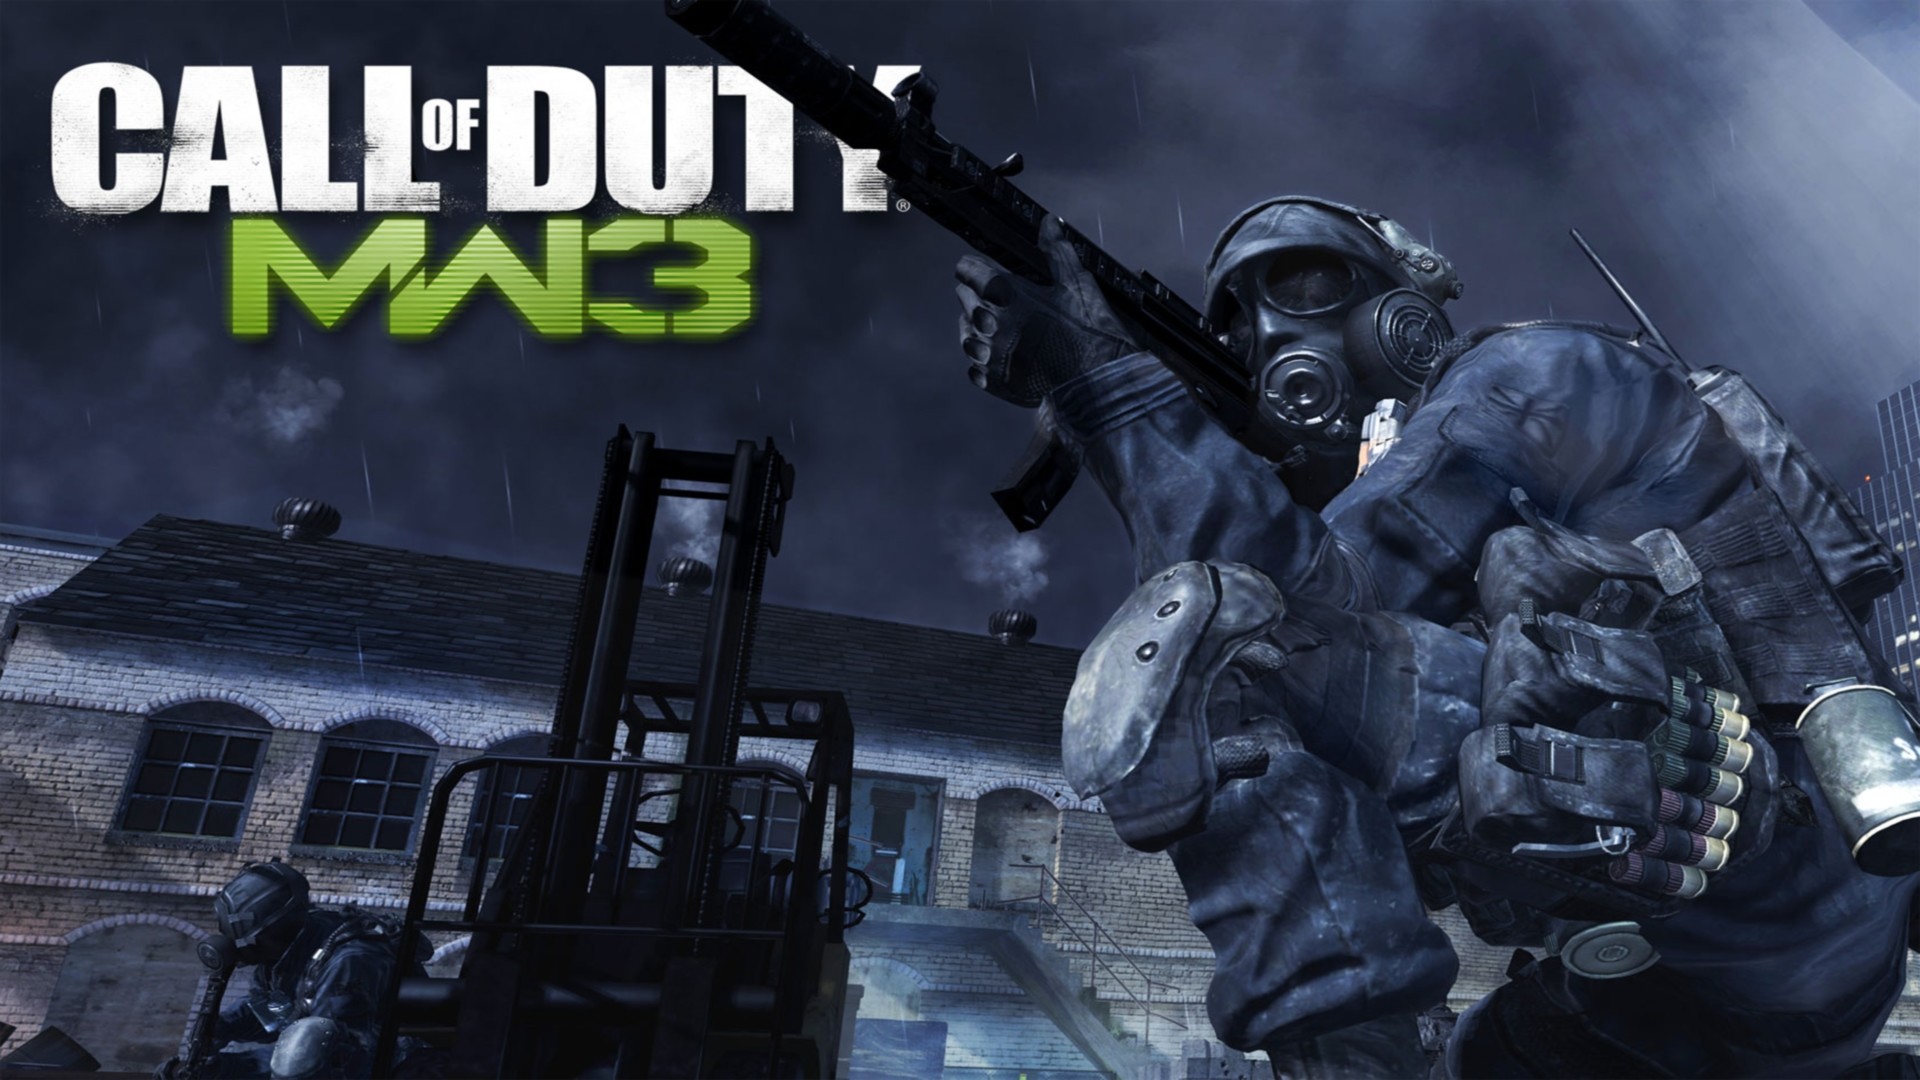 1920x1080 Call Of Duty Modern Warfare 3 Wallpaper for PC | Full HD Pictures